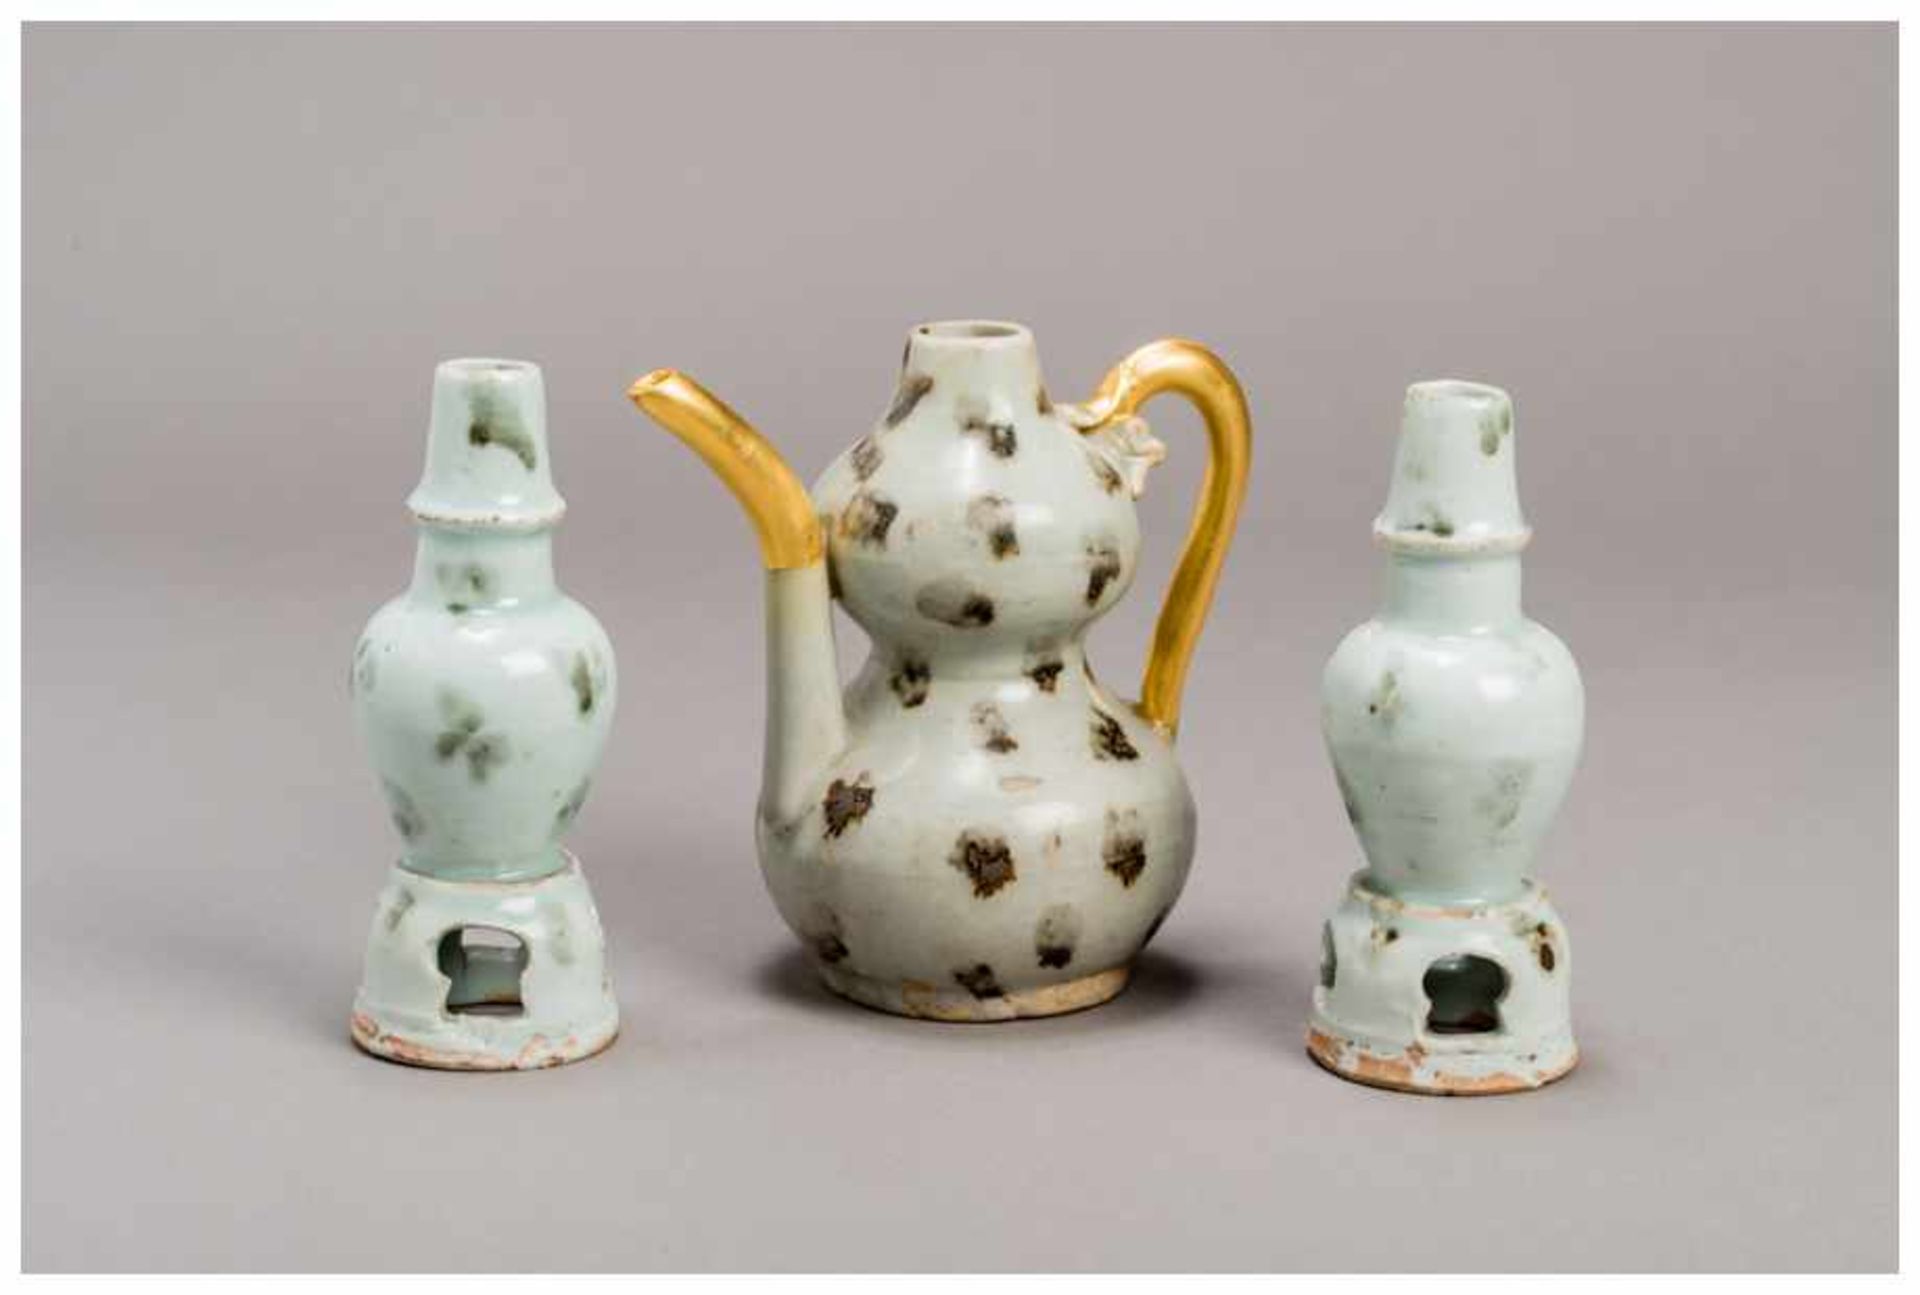 A CHINESE DOUBLE GOURD POT AND TWO ALTAR VASES Glazed ceramic. China, Song to Yuan-dynastyThe 'altar